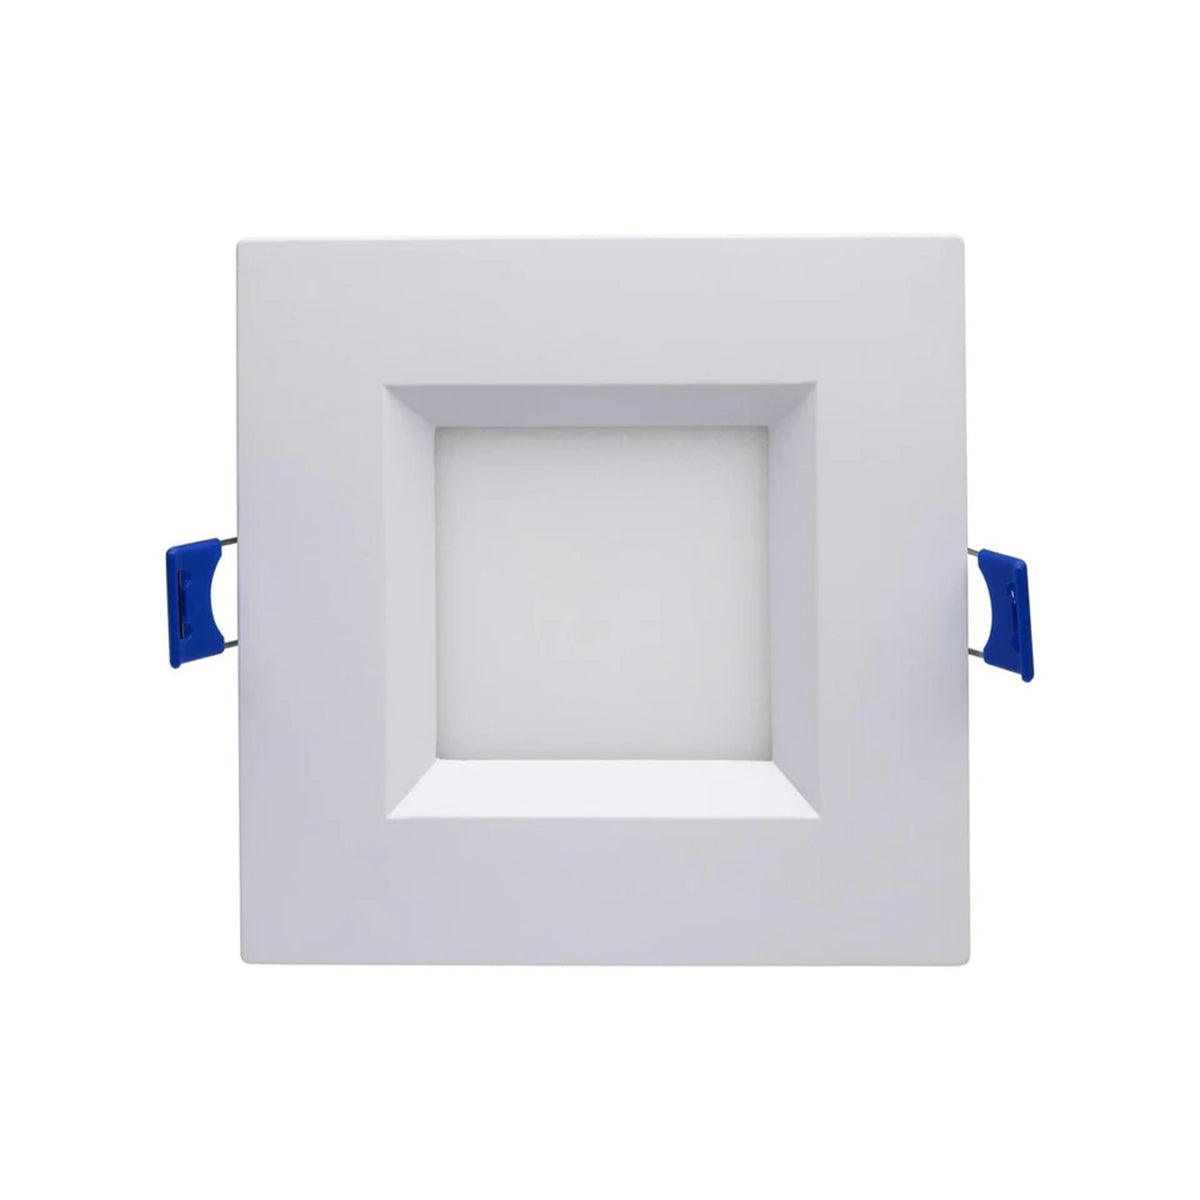 Slim Fit Canless LED Recessed Light, 4 Inch, Square, 12 Watt, 750 Lumens, Selectable CCT, 2700K to 5000K